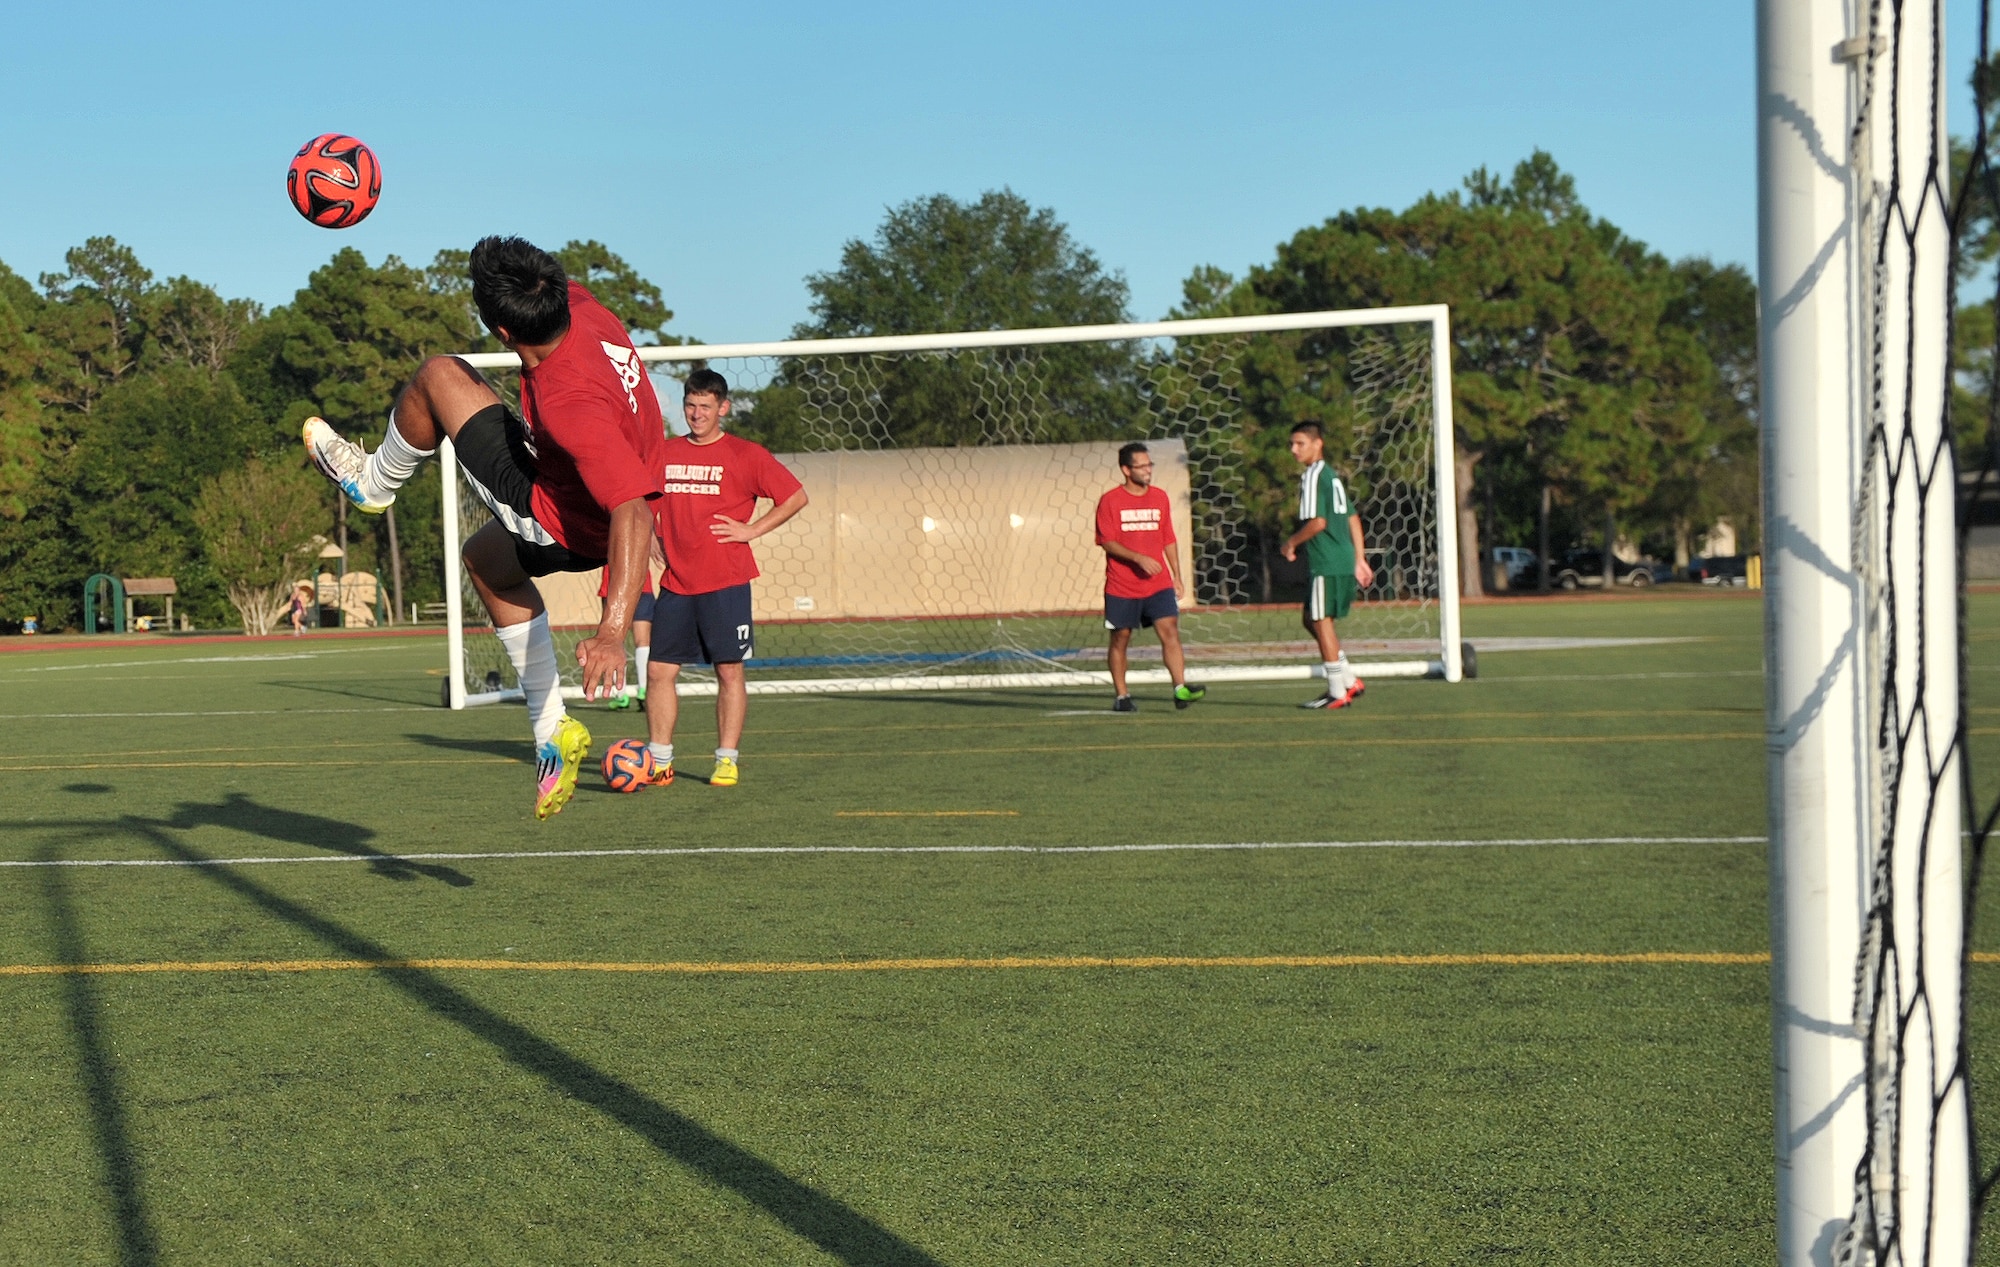 Michael Martinez, Hurburt Field Soccer Team, outside midfielder, attempts a bicycle kick during practice at the Aderholt Fitness Center Aug. 26, 2014. The base soccer team placed 5th in the 2013 Department of Defense Soccer Tournament. (U.S. Air Force photo/Senior Airman Kentavist P. Brackin)